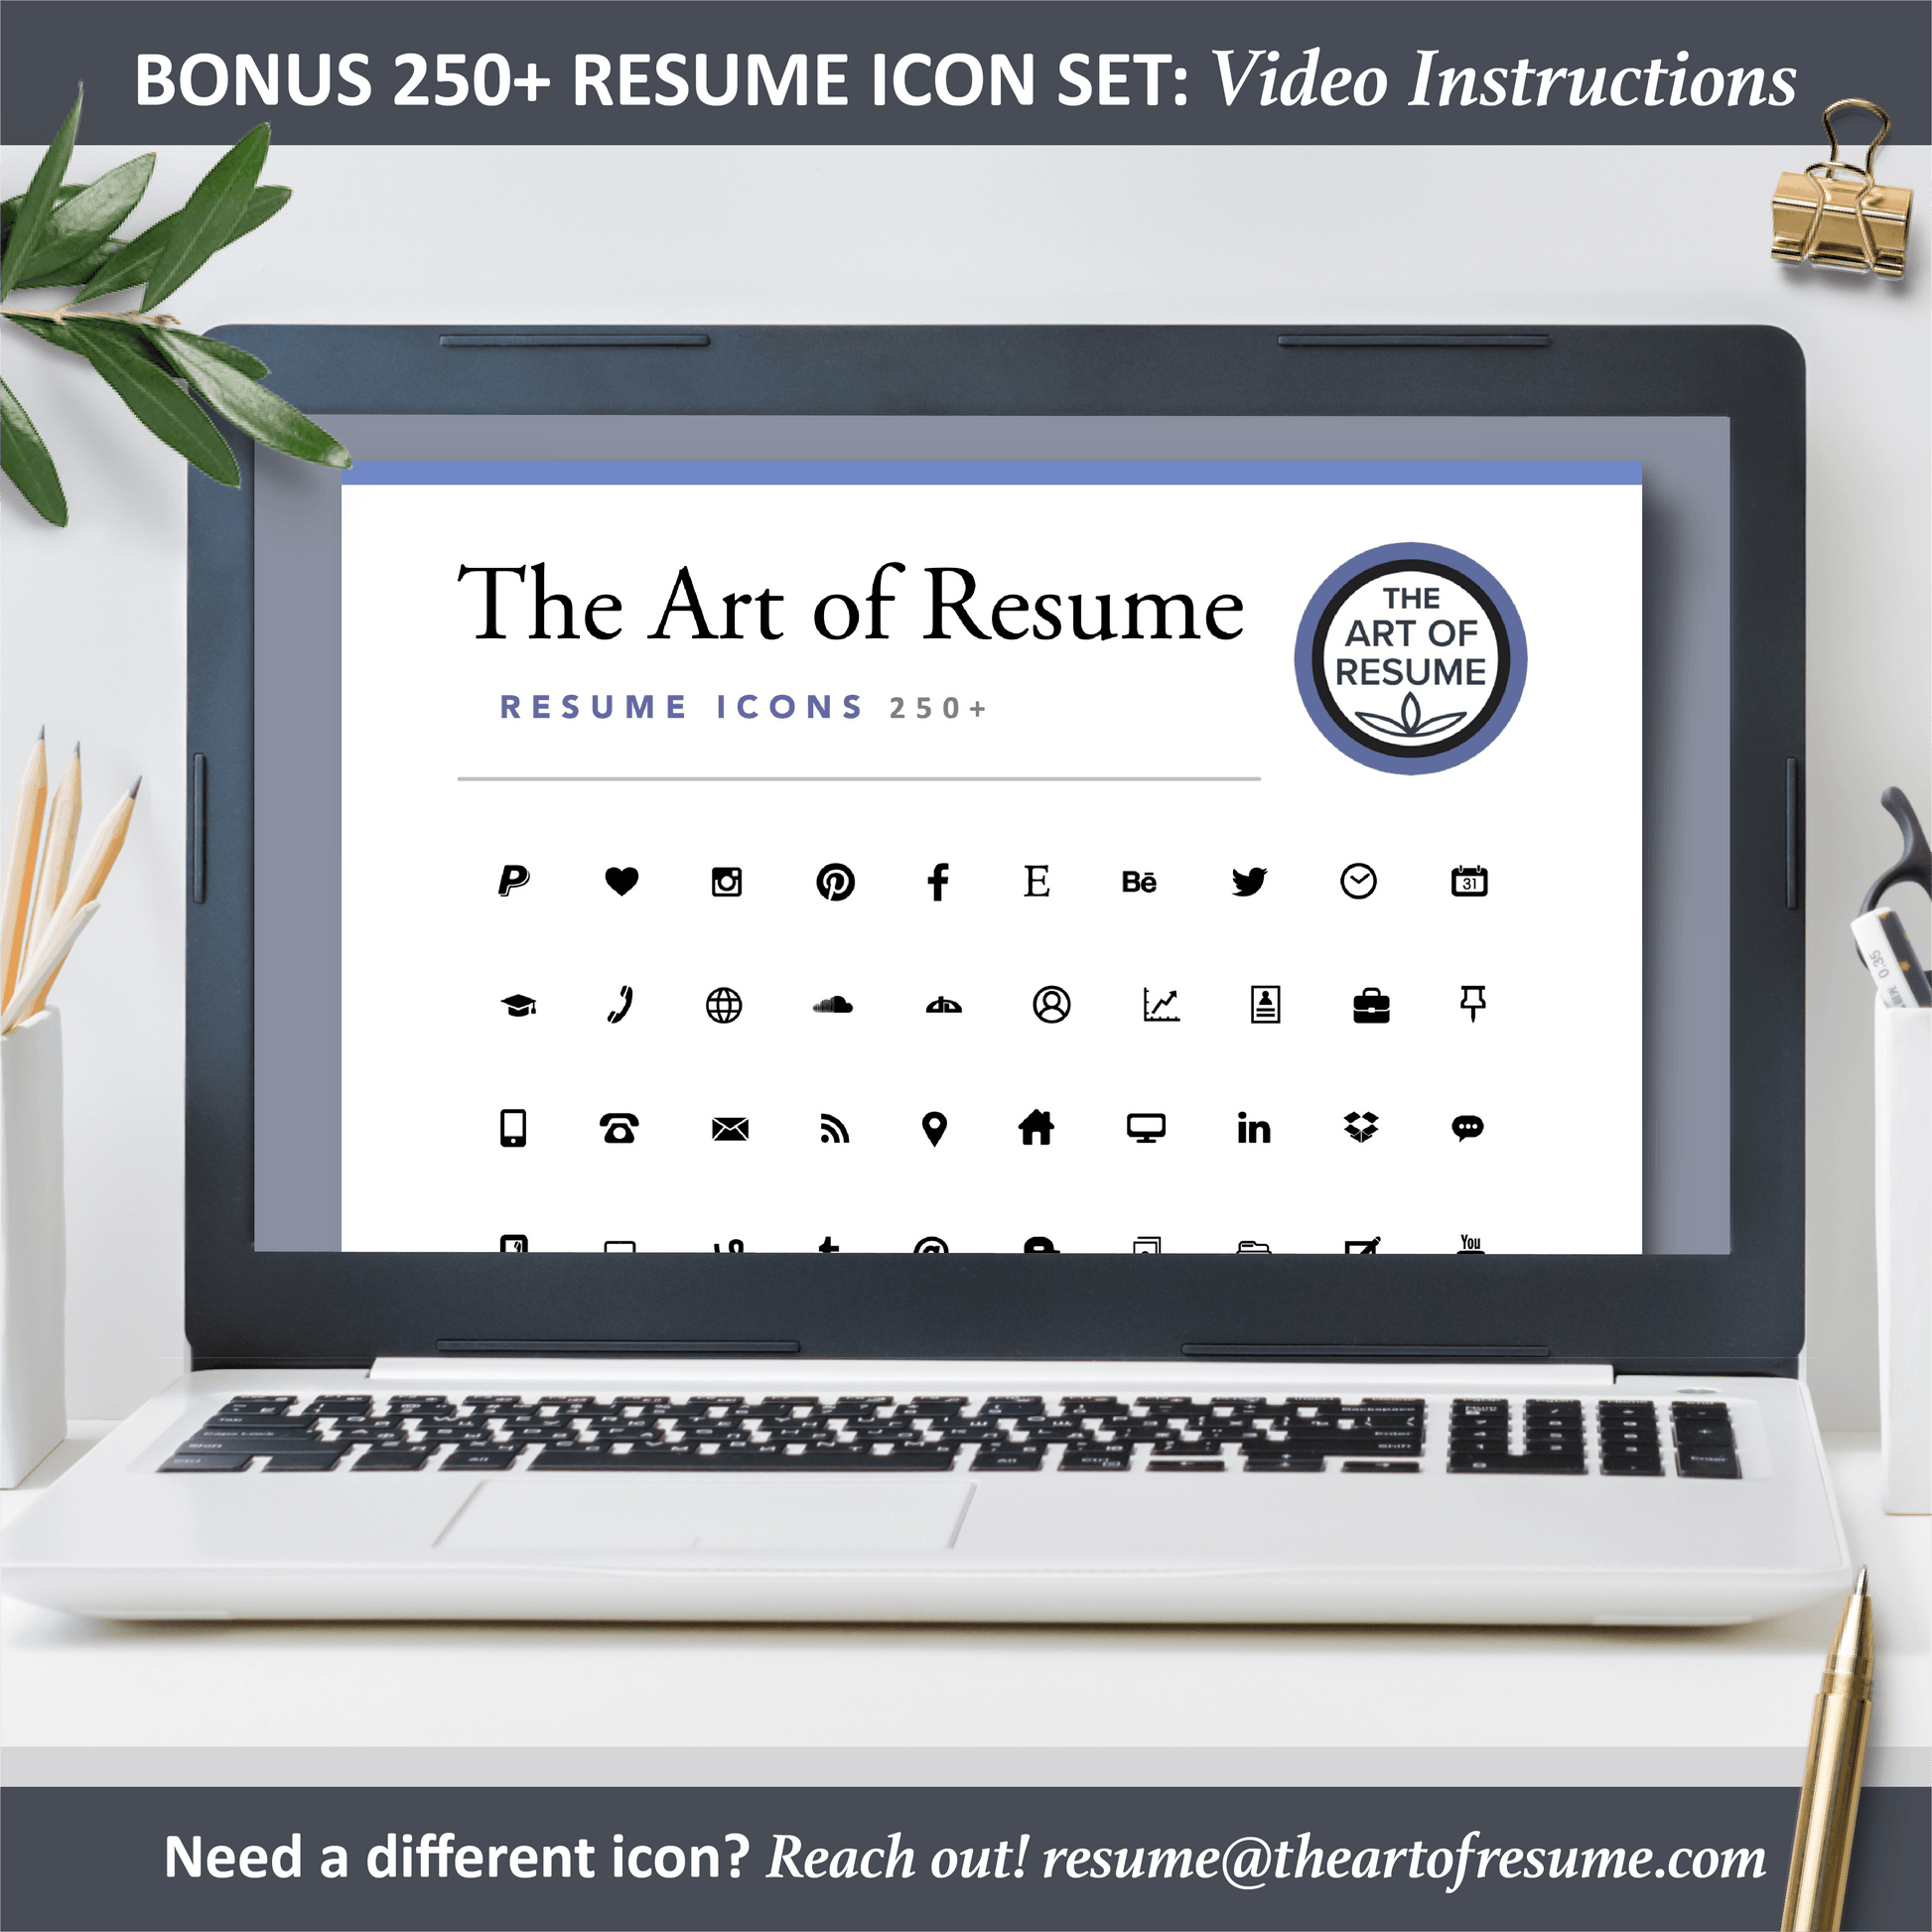 Professional Resume Design | Executive Resume Format | Free Cover Letter - The Art of Resume